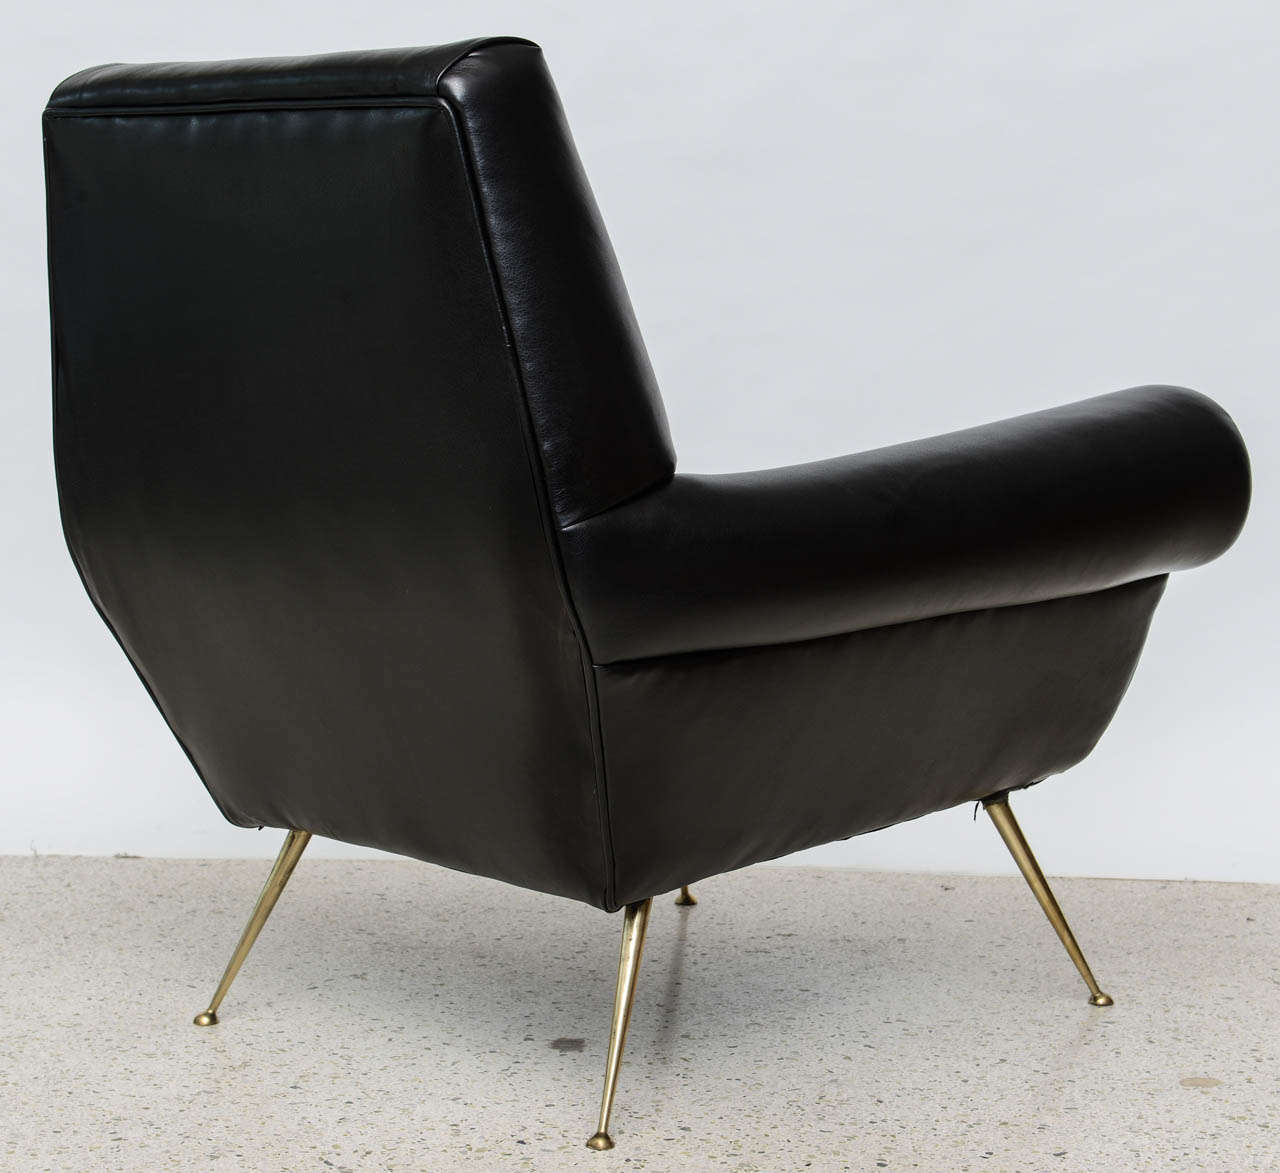 Mid-20th Century Pair of Italian Modern Leather and Brass Lounge Chairs, Minotti